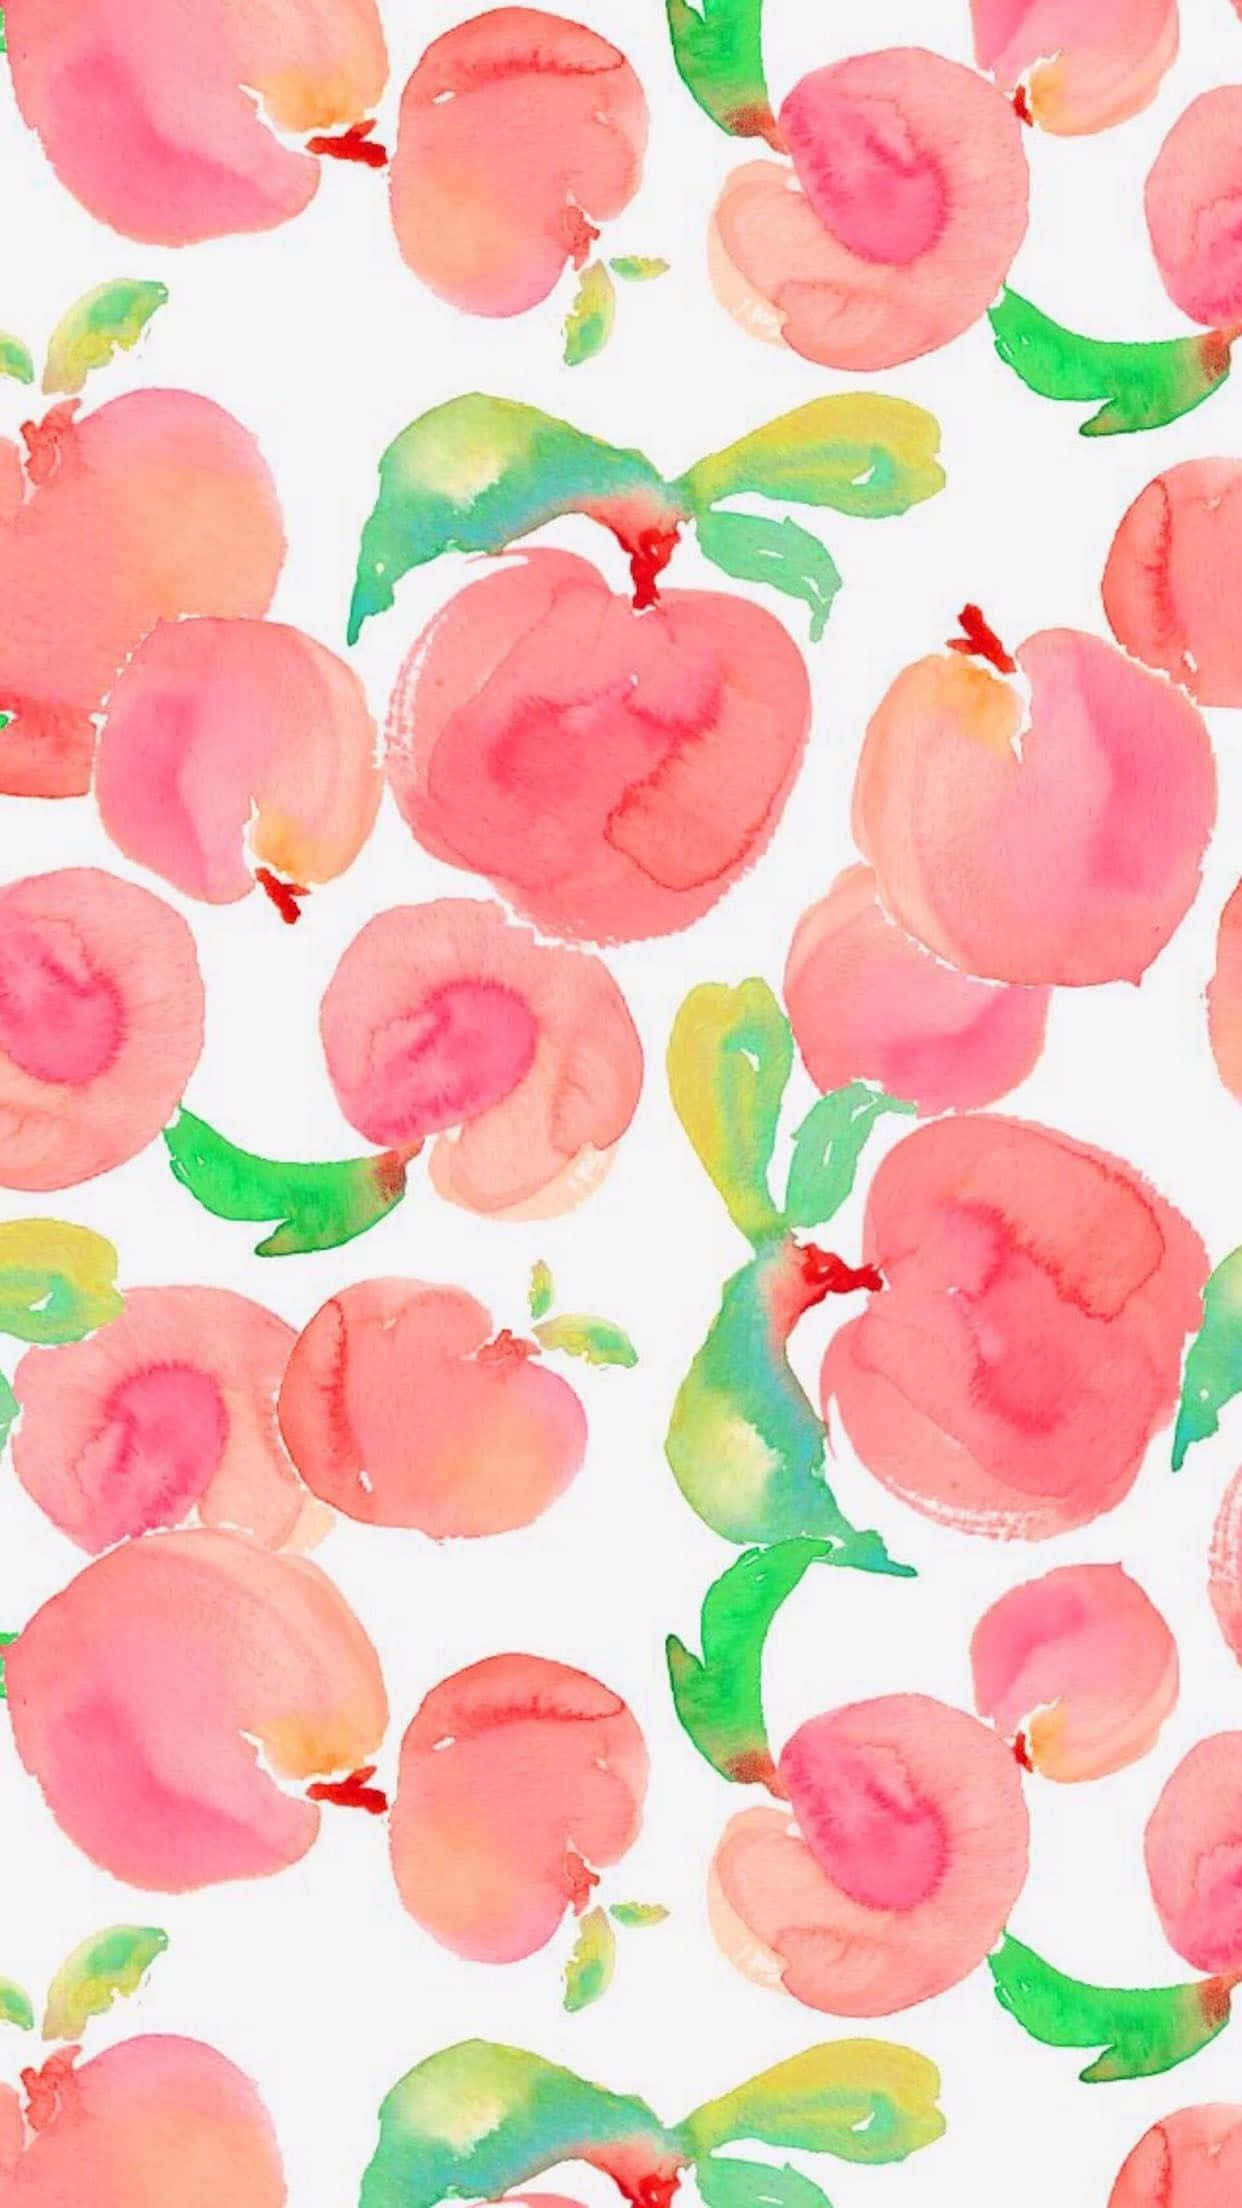 Enjoy the vibrant colors of the new Peach iPhone Wallpaper